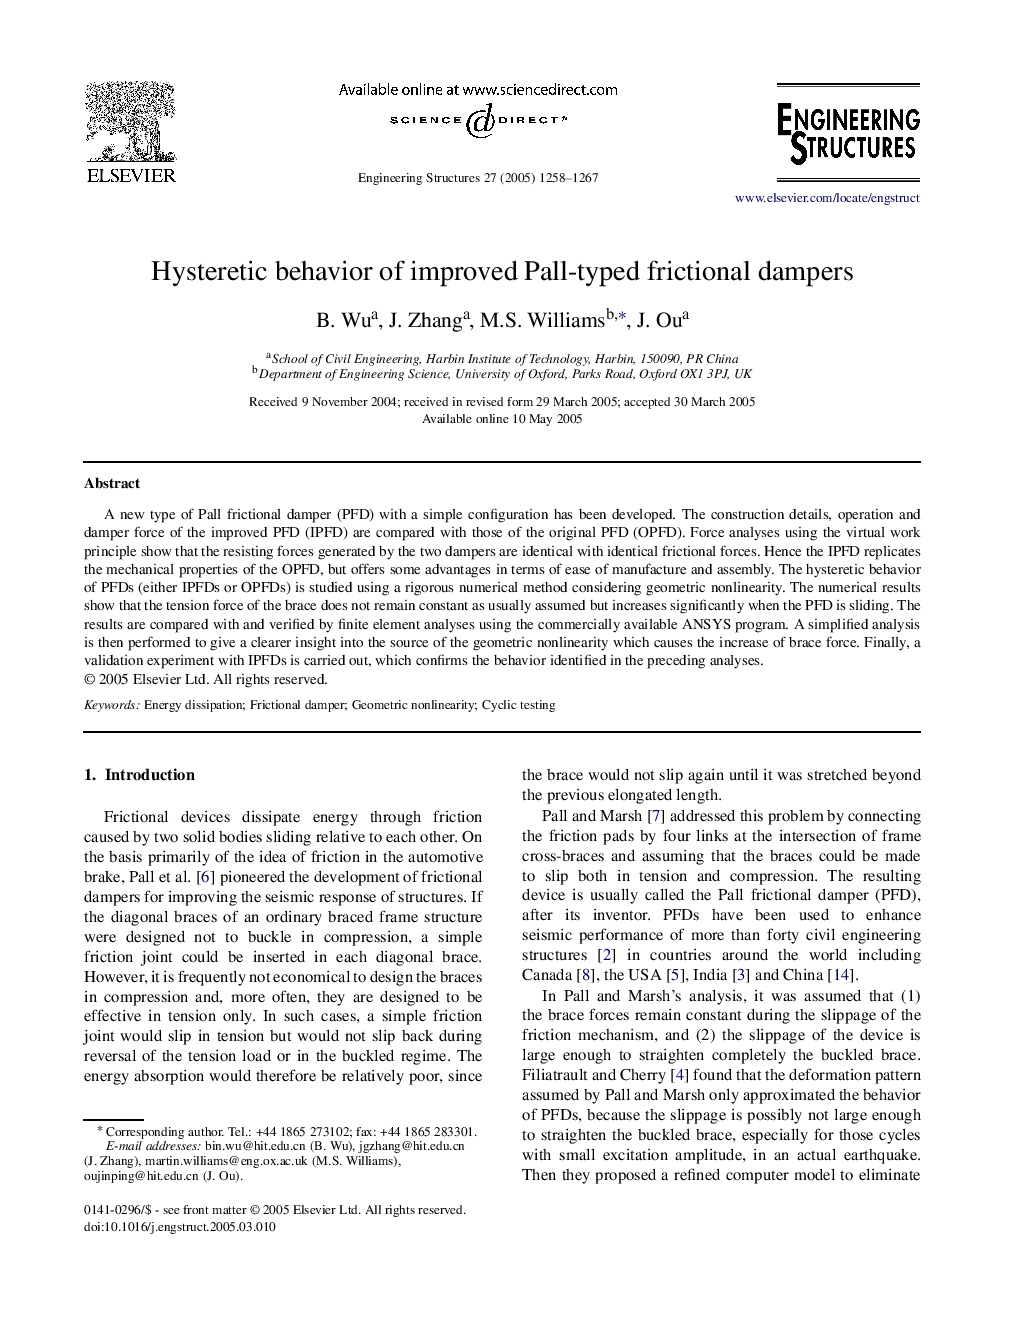 Hysteretic behavior of improved Pall-typed frictional dampers